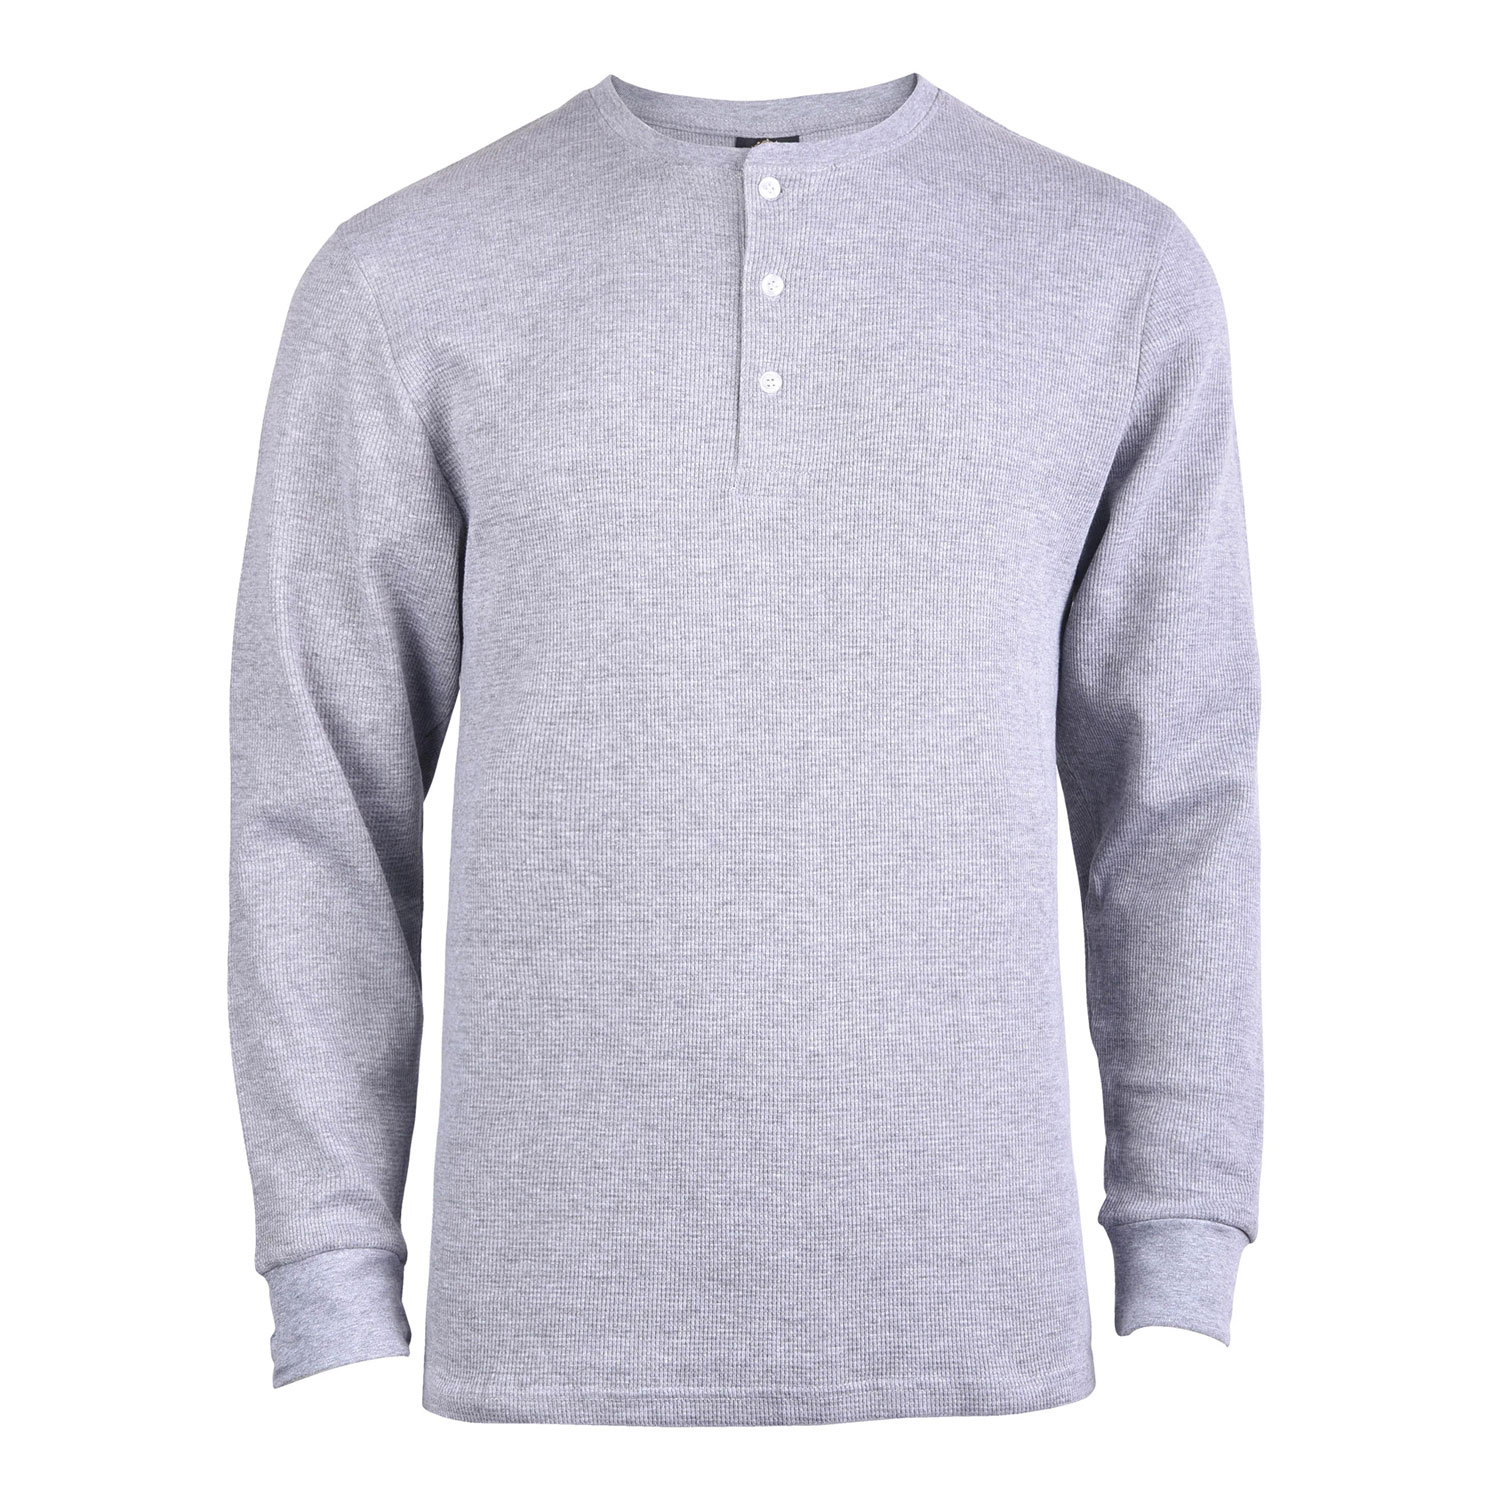 Buy One Get One Free Men's Waffle Knit Thermal Henley Shirt